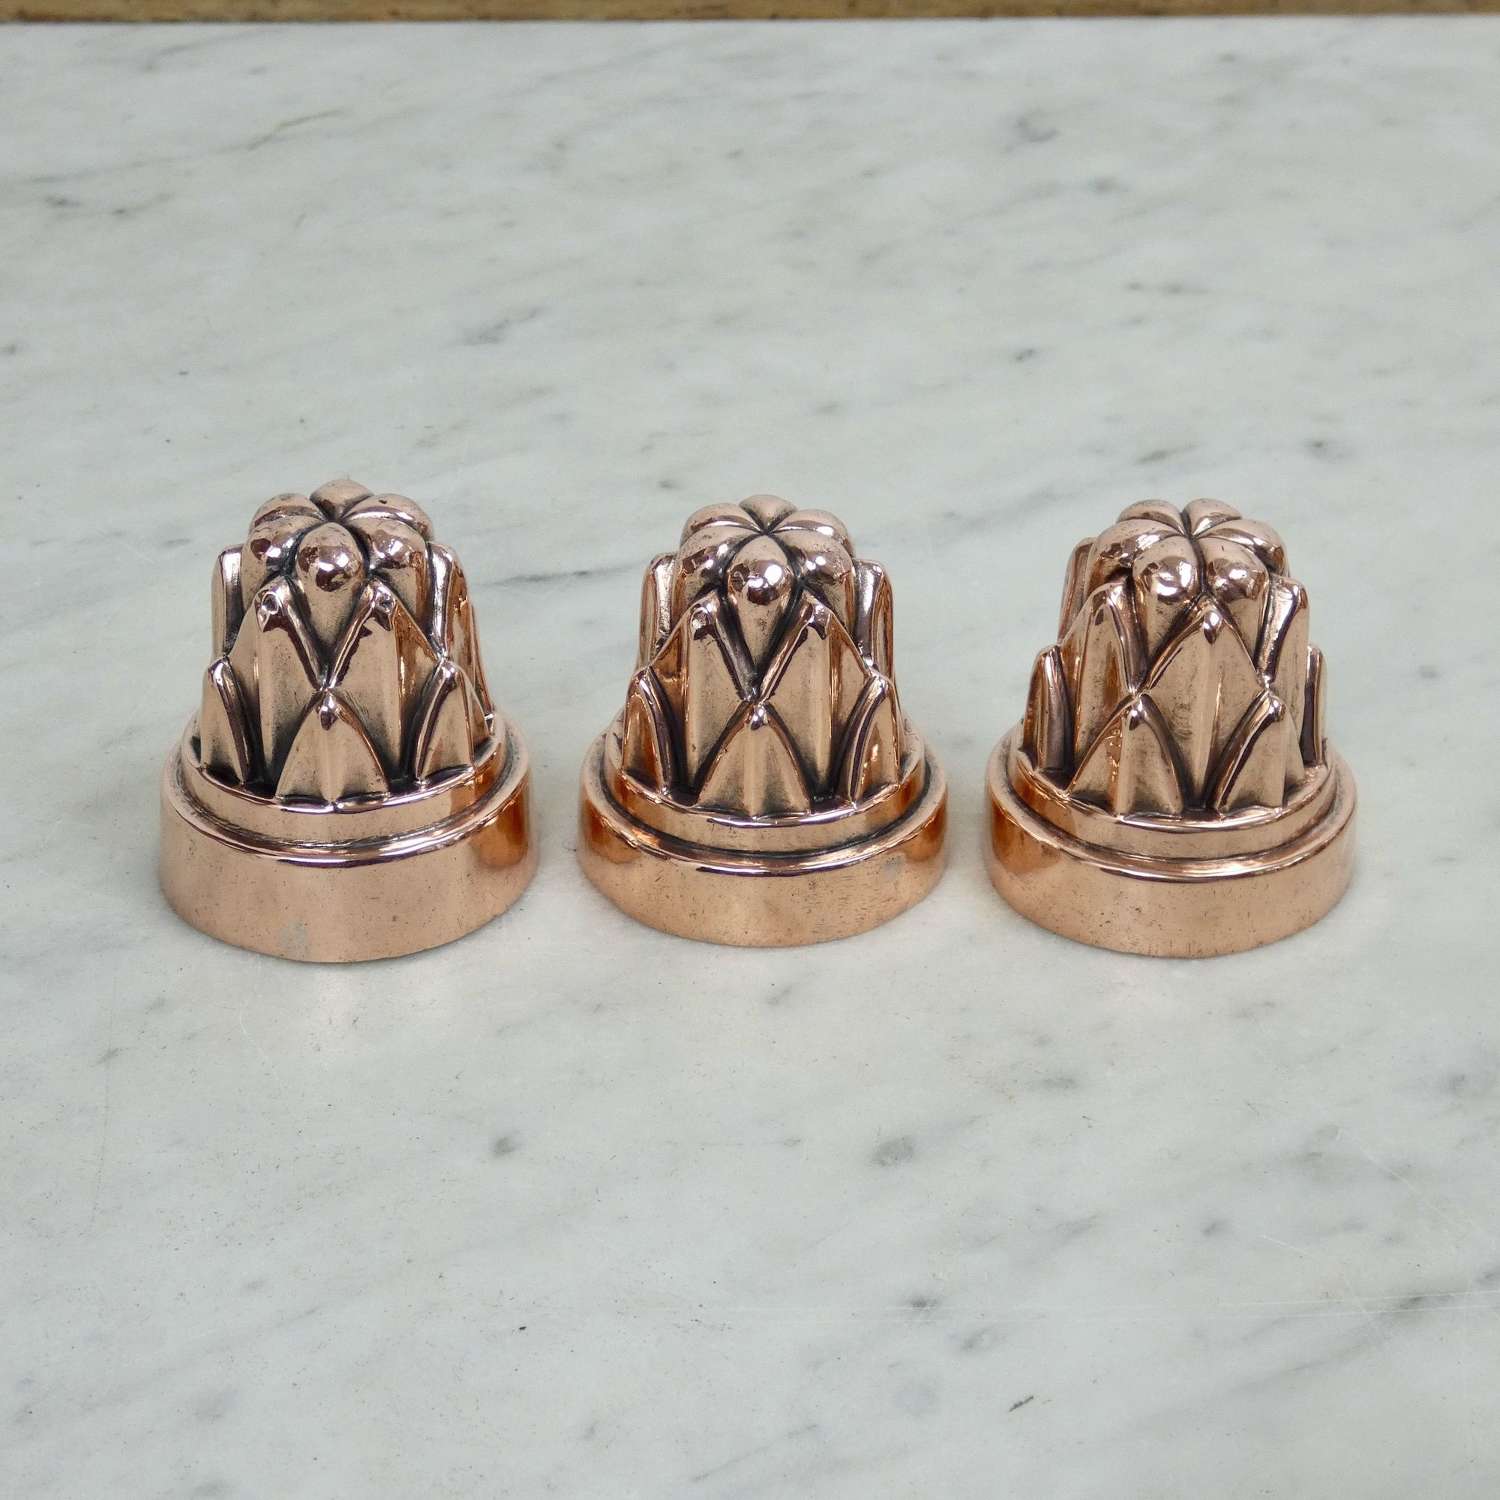 Miniature copper moulds of cardoons